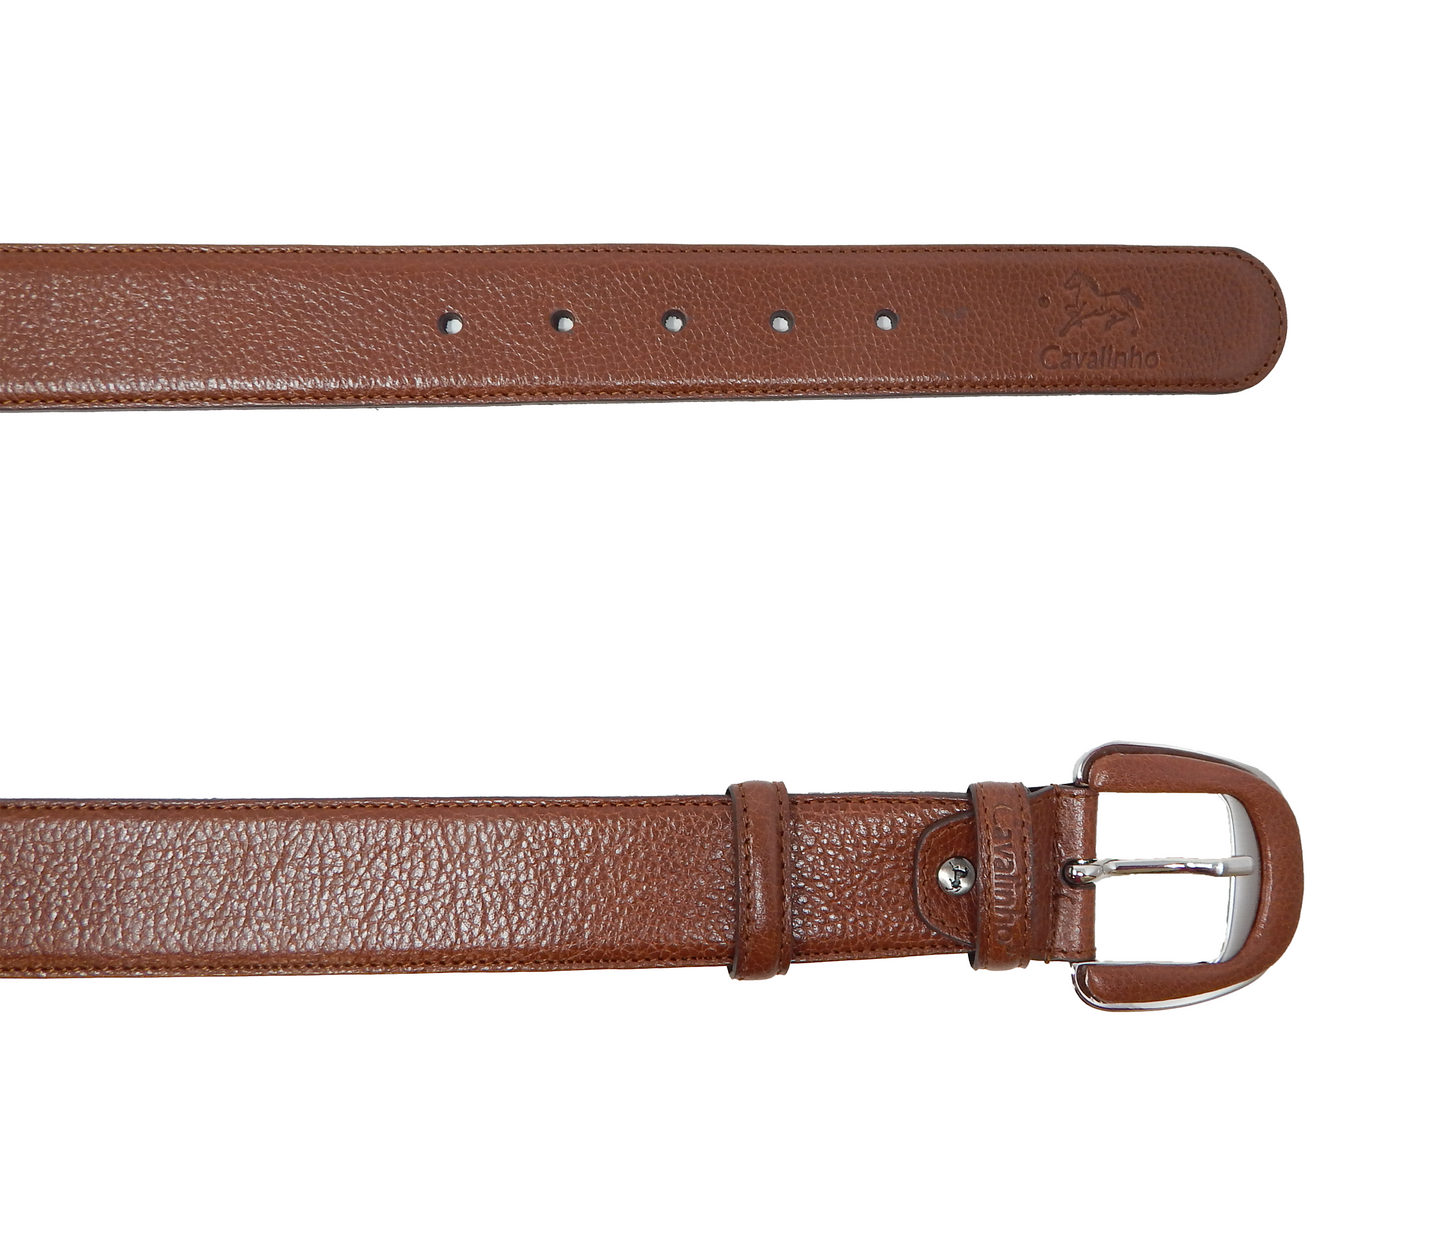 Cavalinho Classic Smooth Leather Belt - SaddleBrown Silver - 58010906.13.S_3